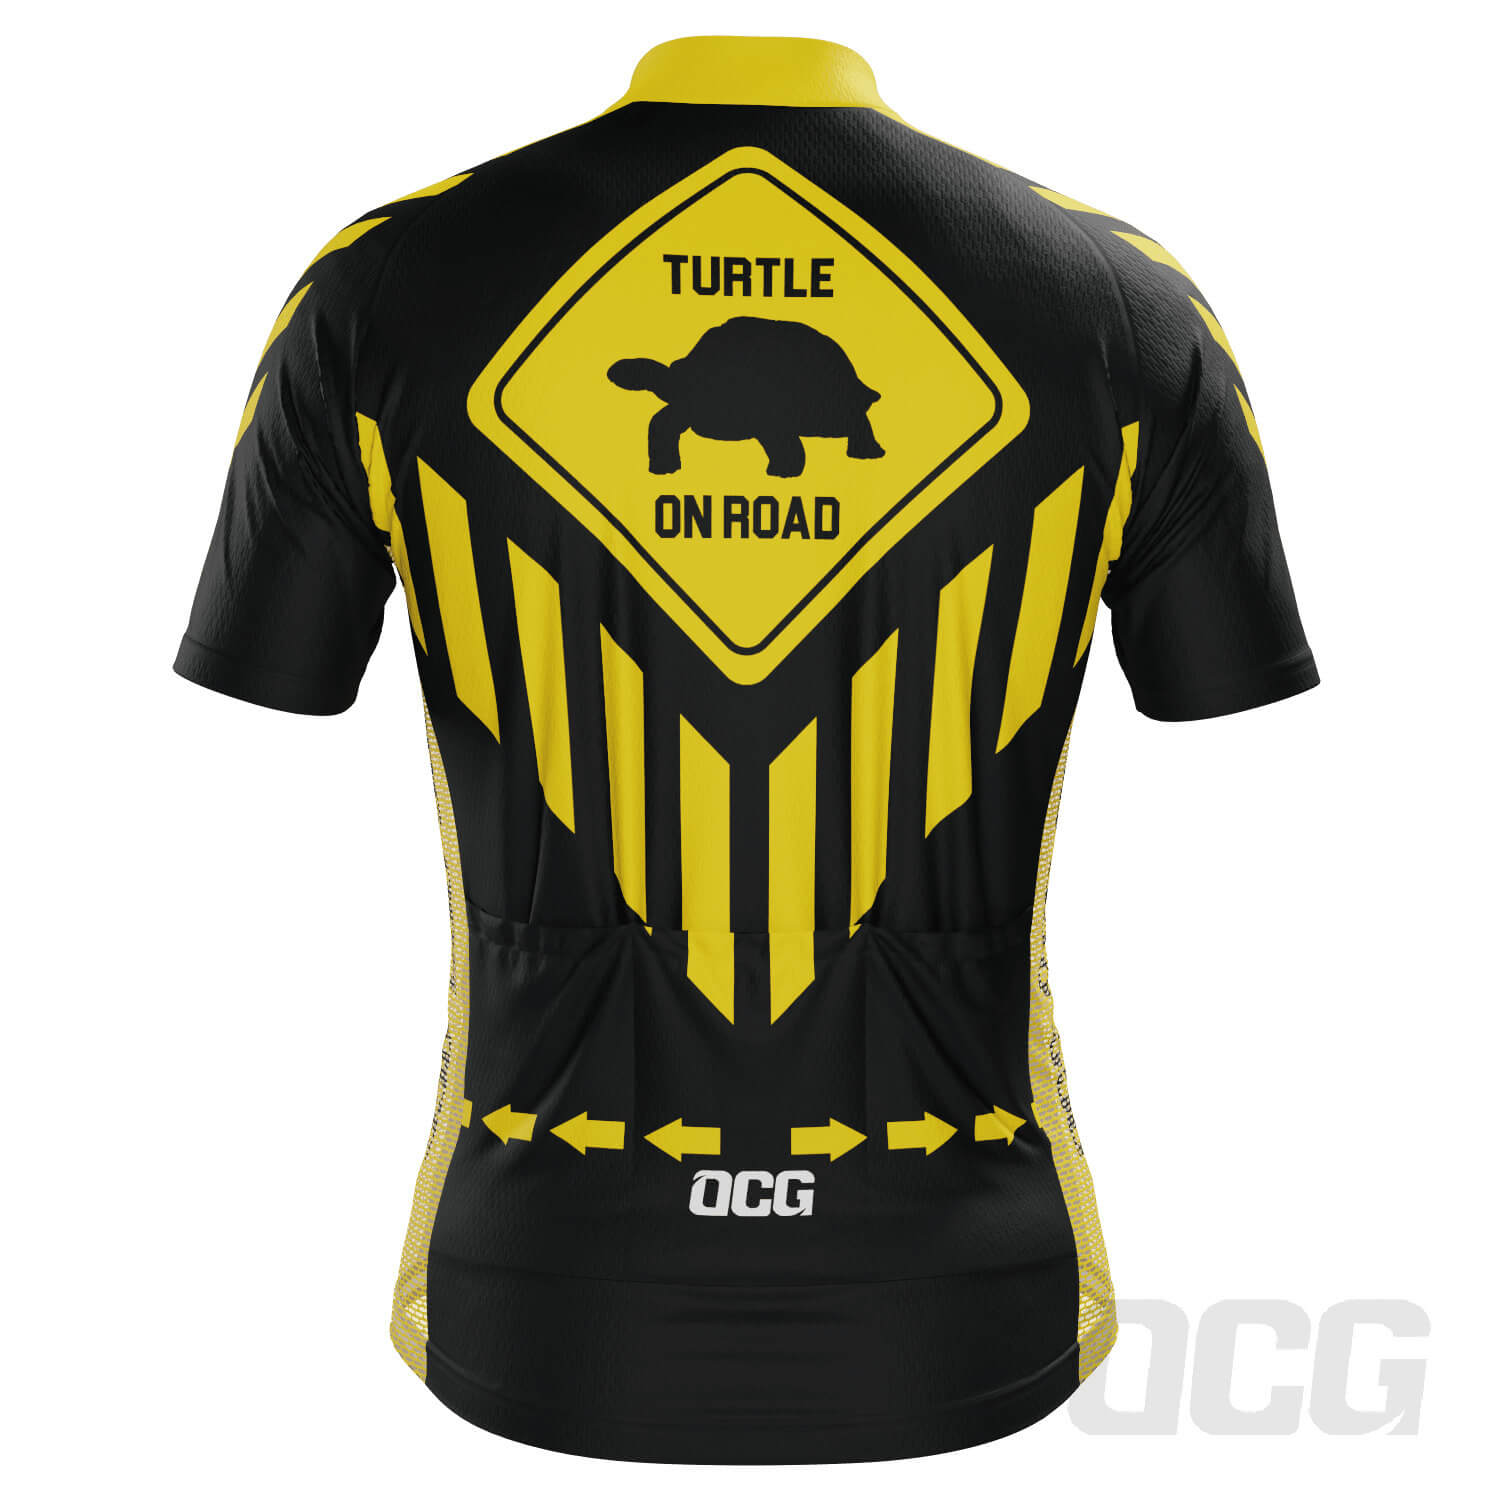 Men's Turtle on Road Short Sleeve Cycling Jersey